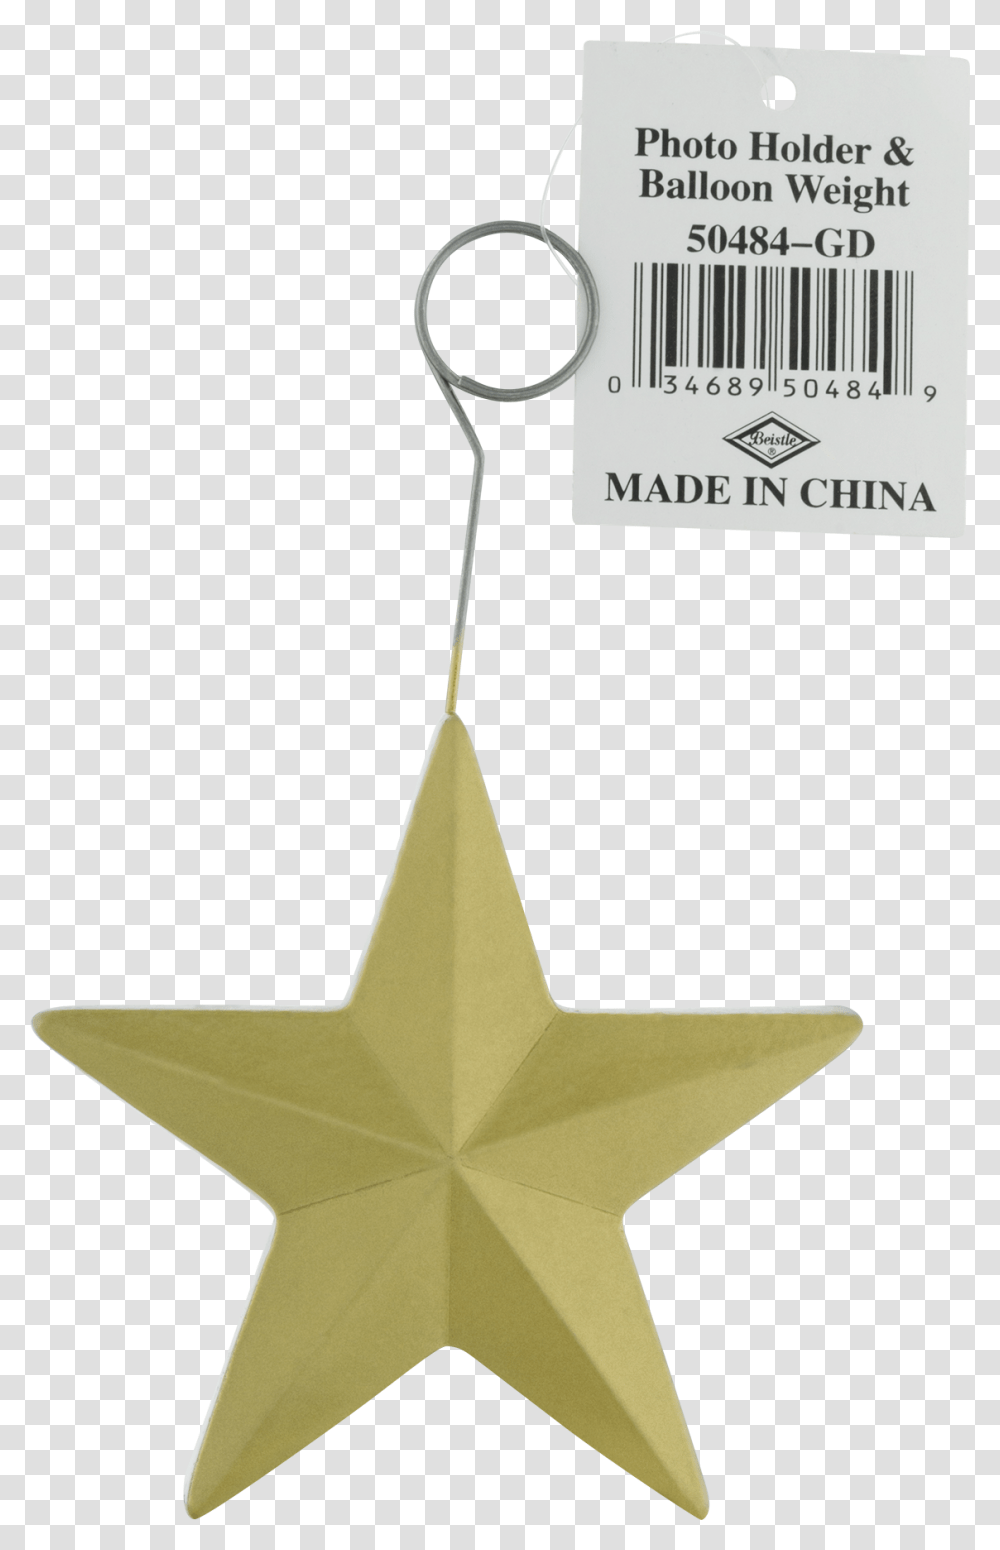 Star Photoballoon Holder Gold Party Accessory 1 Count Gd Fashionish Icon, Cross, Symbol, Star Symbol, Light Fixture Transparent Png